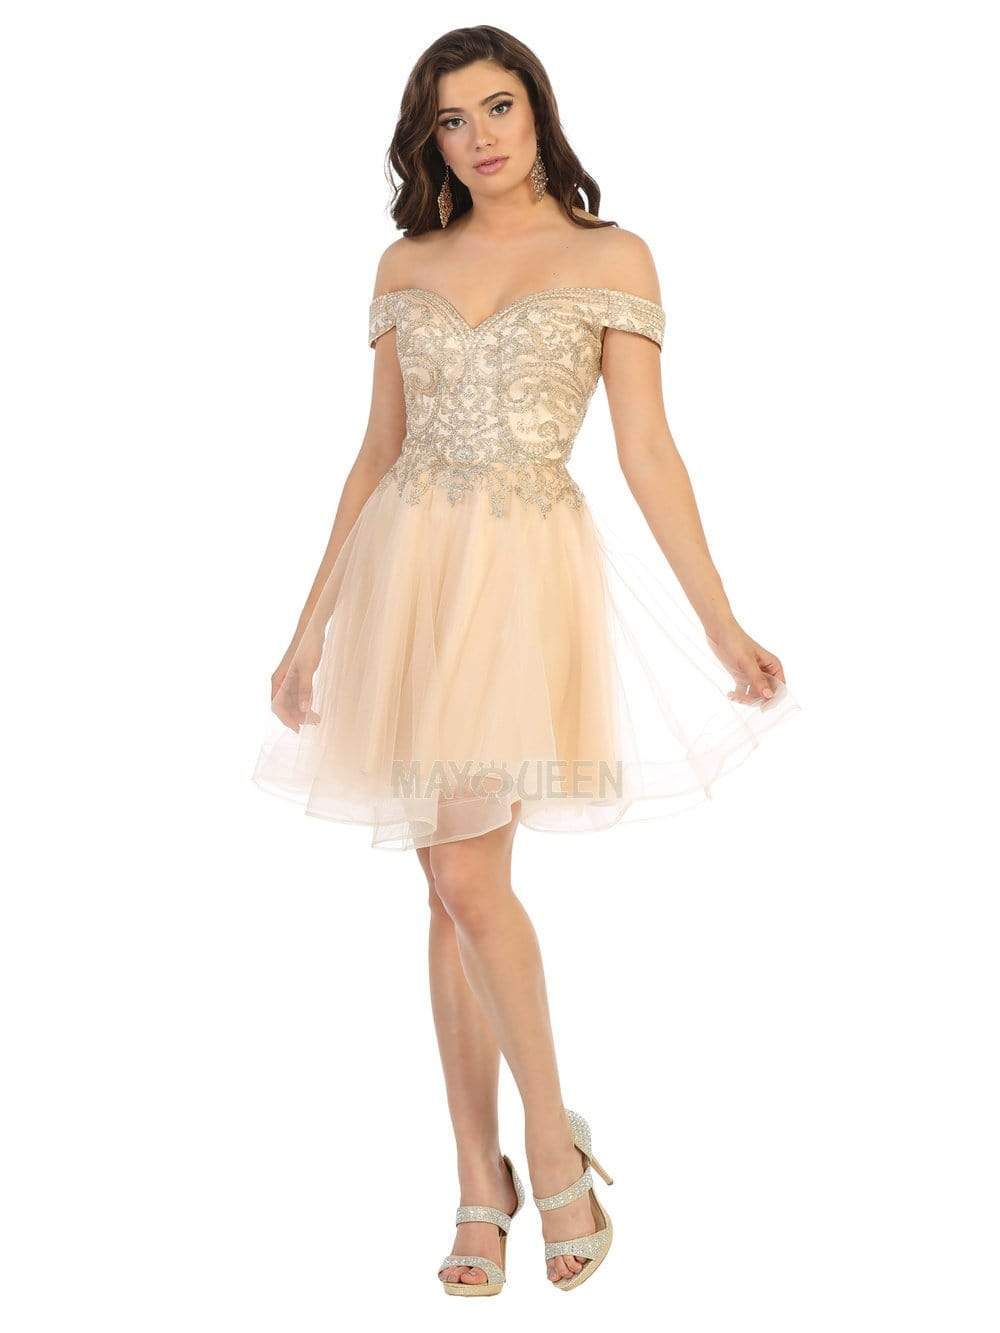 May Queen - MQ1659 Bead-Appliqued Off Shoulder Tulle Dress Cocktail Dresses 2 / Champagne